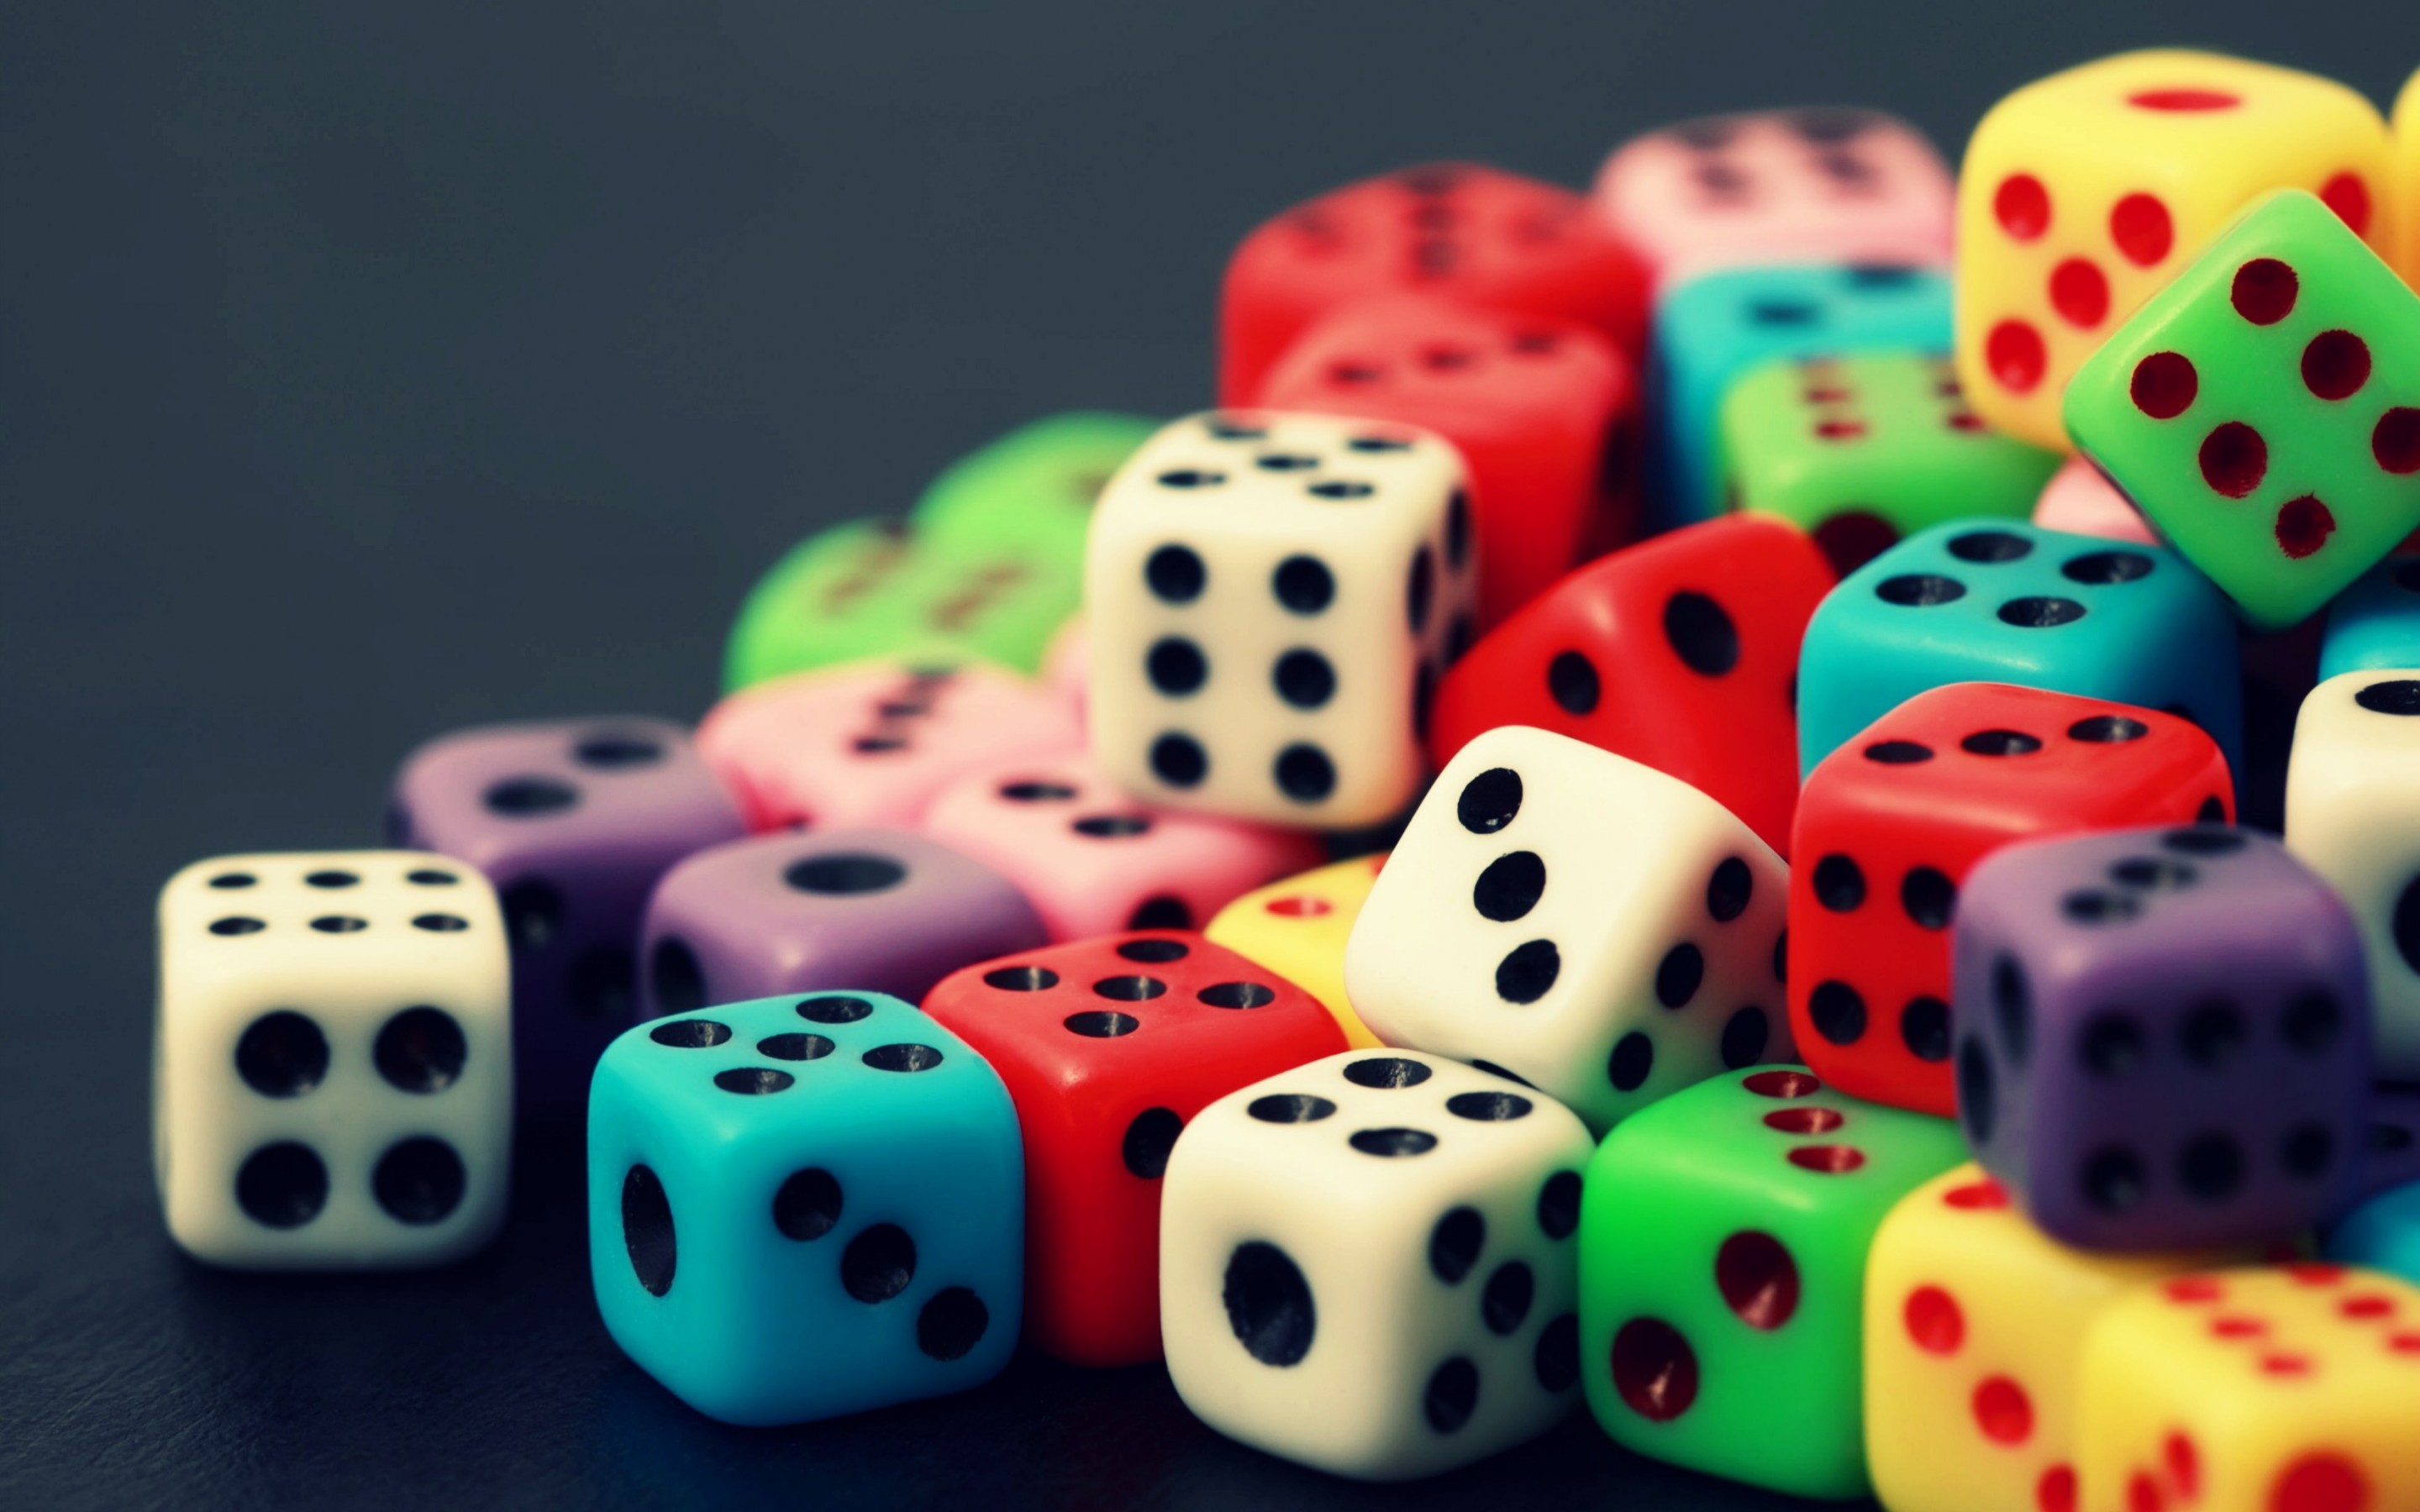 dice wallpaper,games,dice game,indoor games and sports,dice,recreation